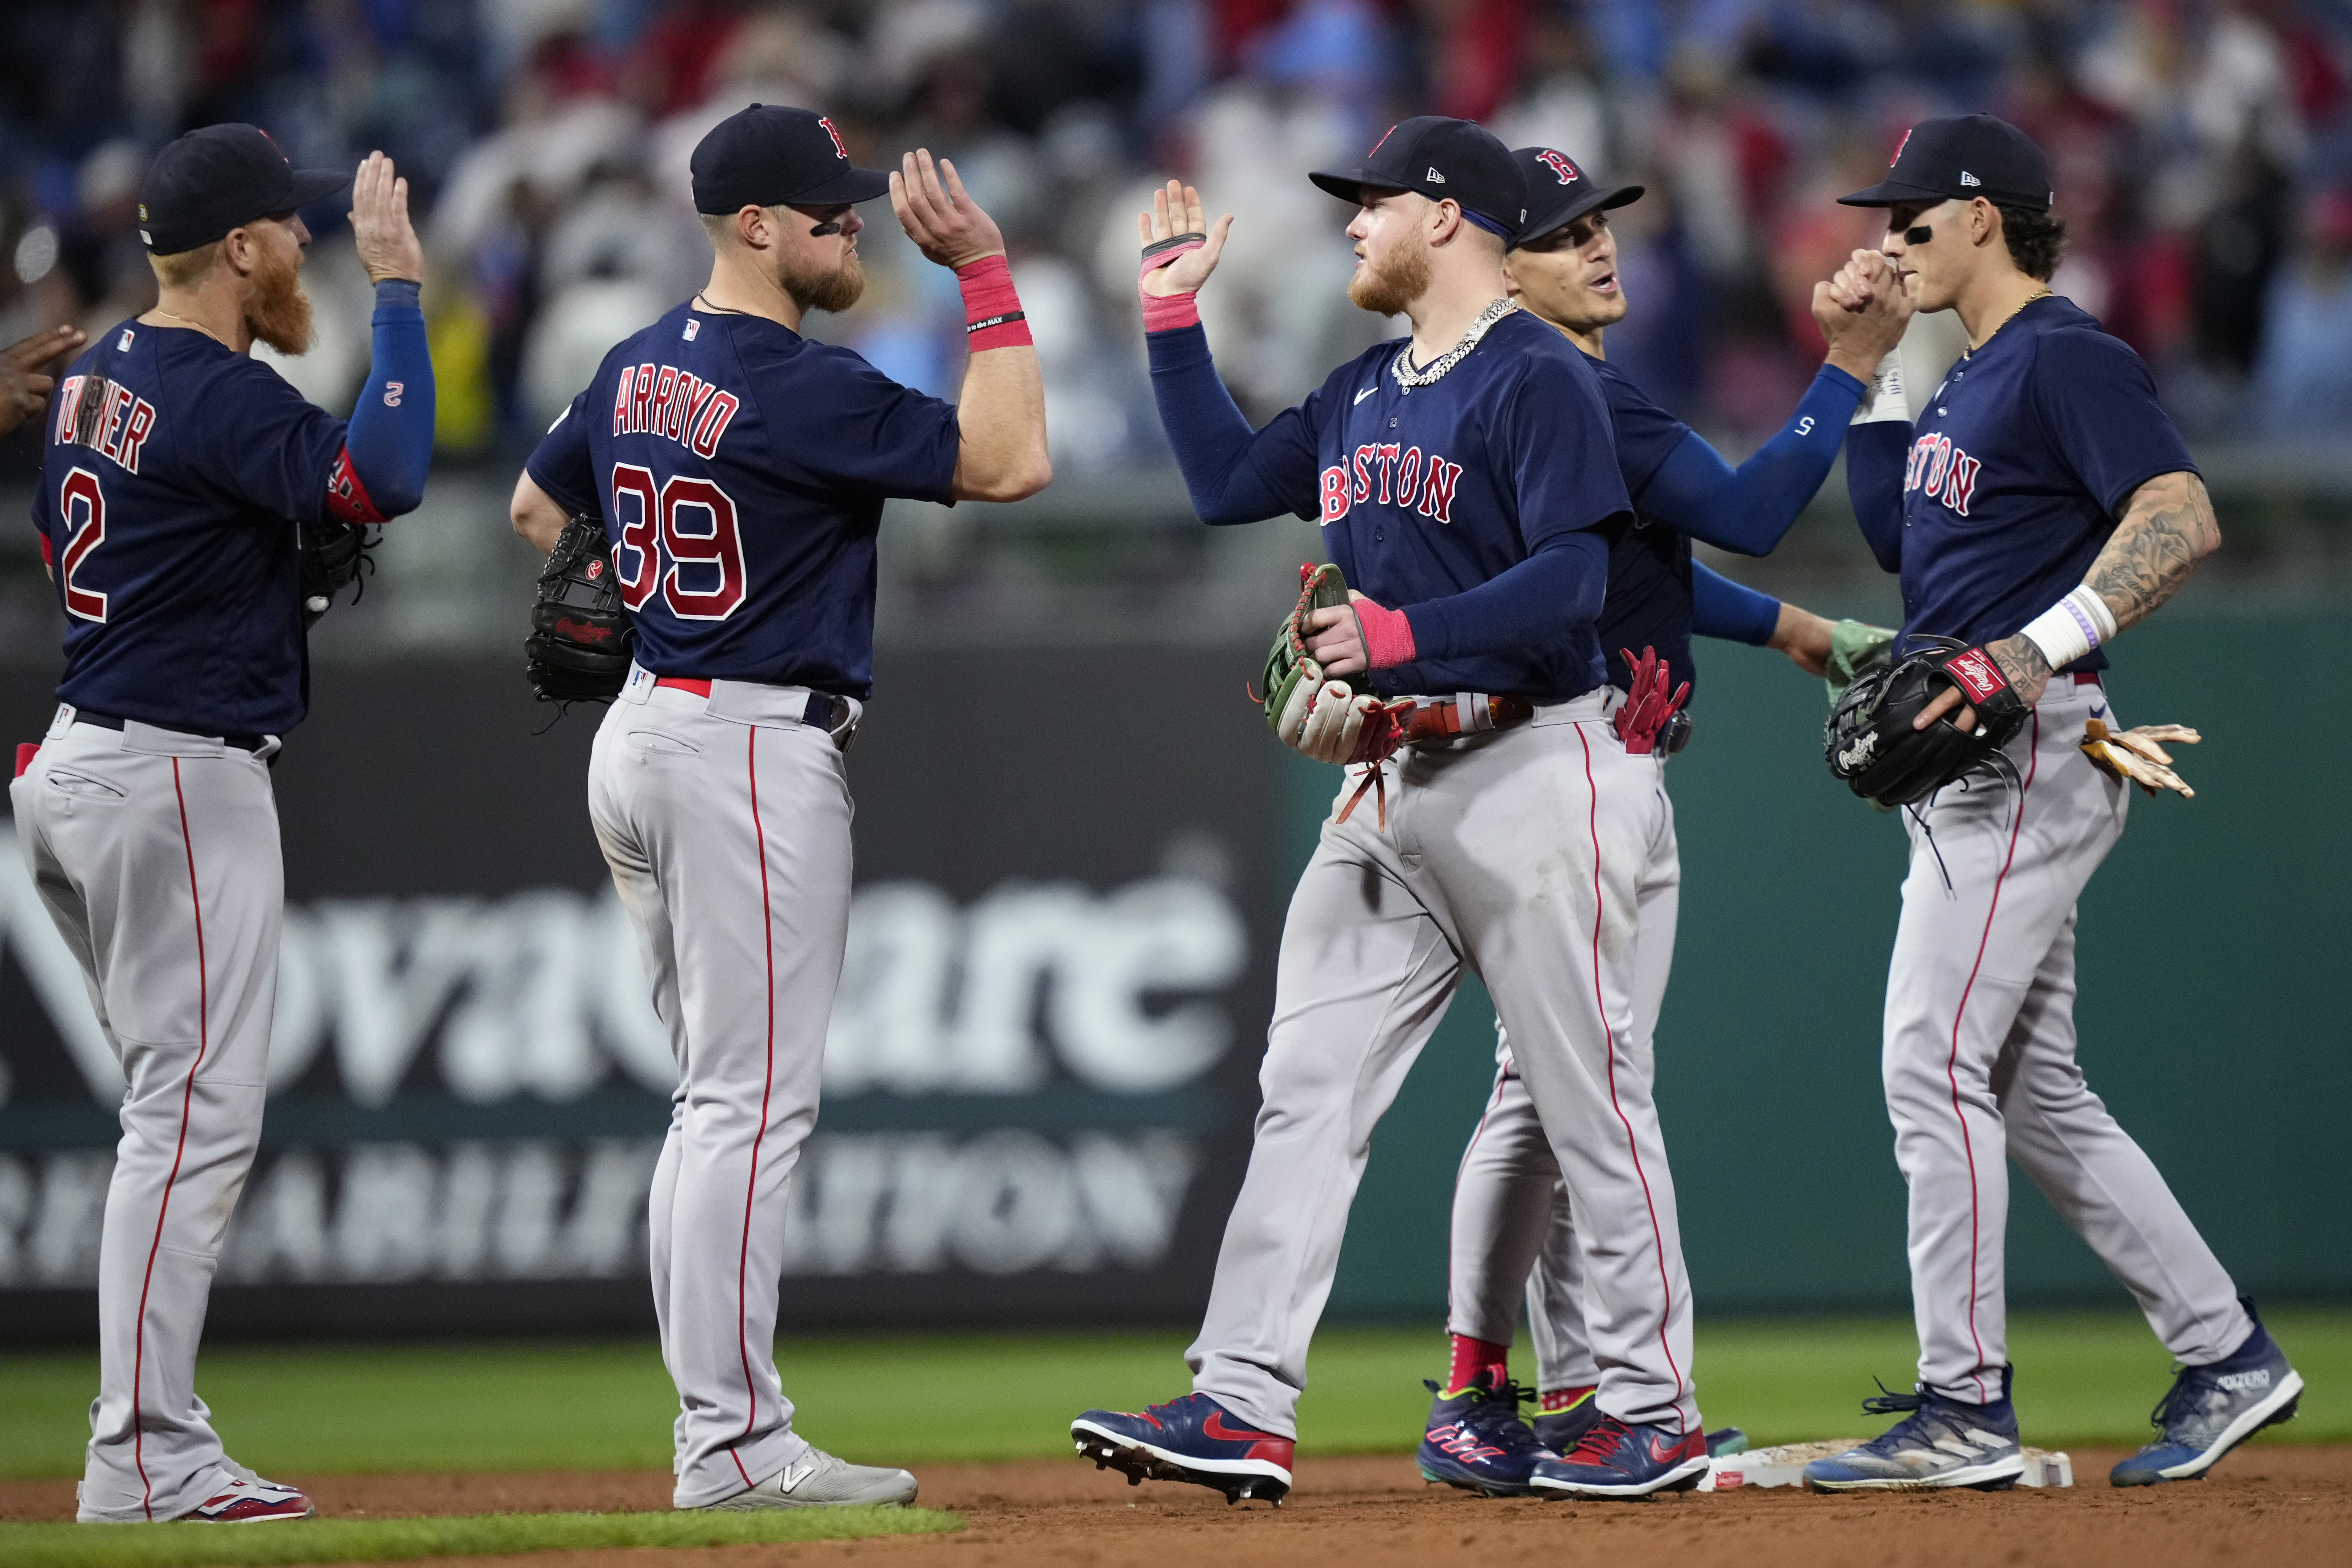 Forget last year, Red Sox look to go worst-to-first (again) in '21